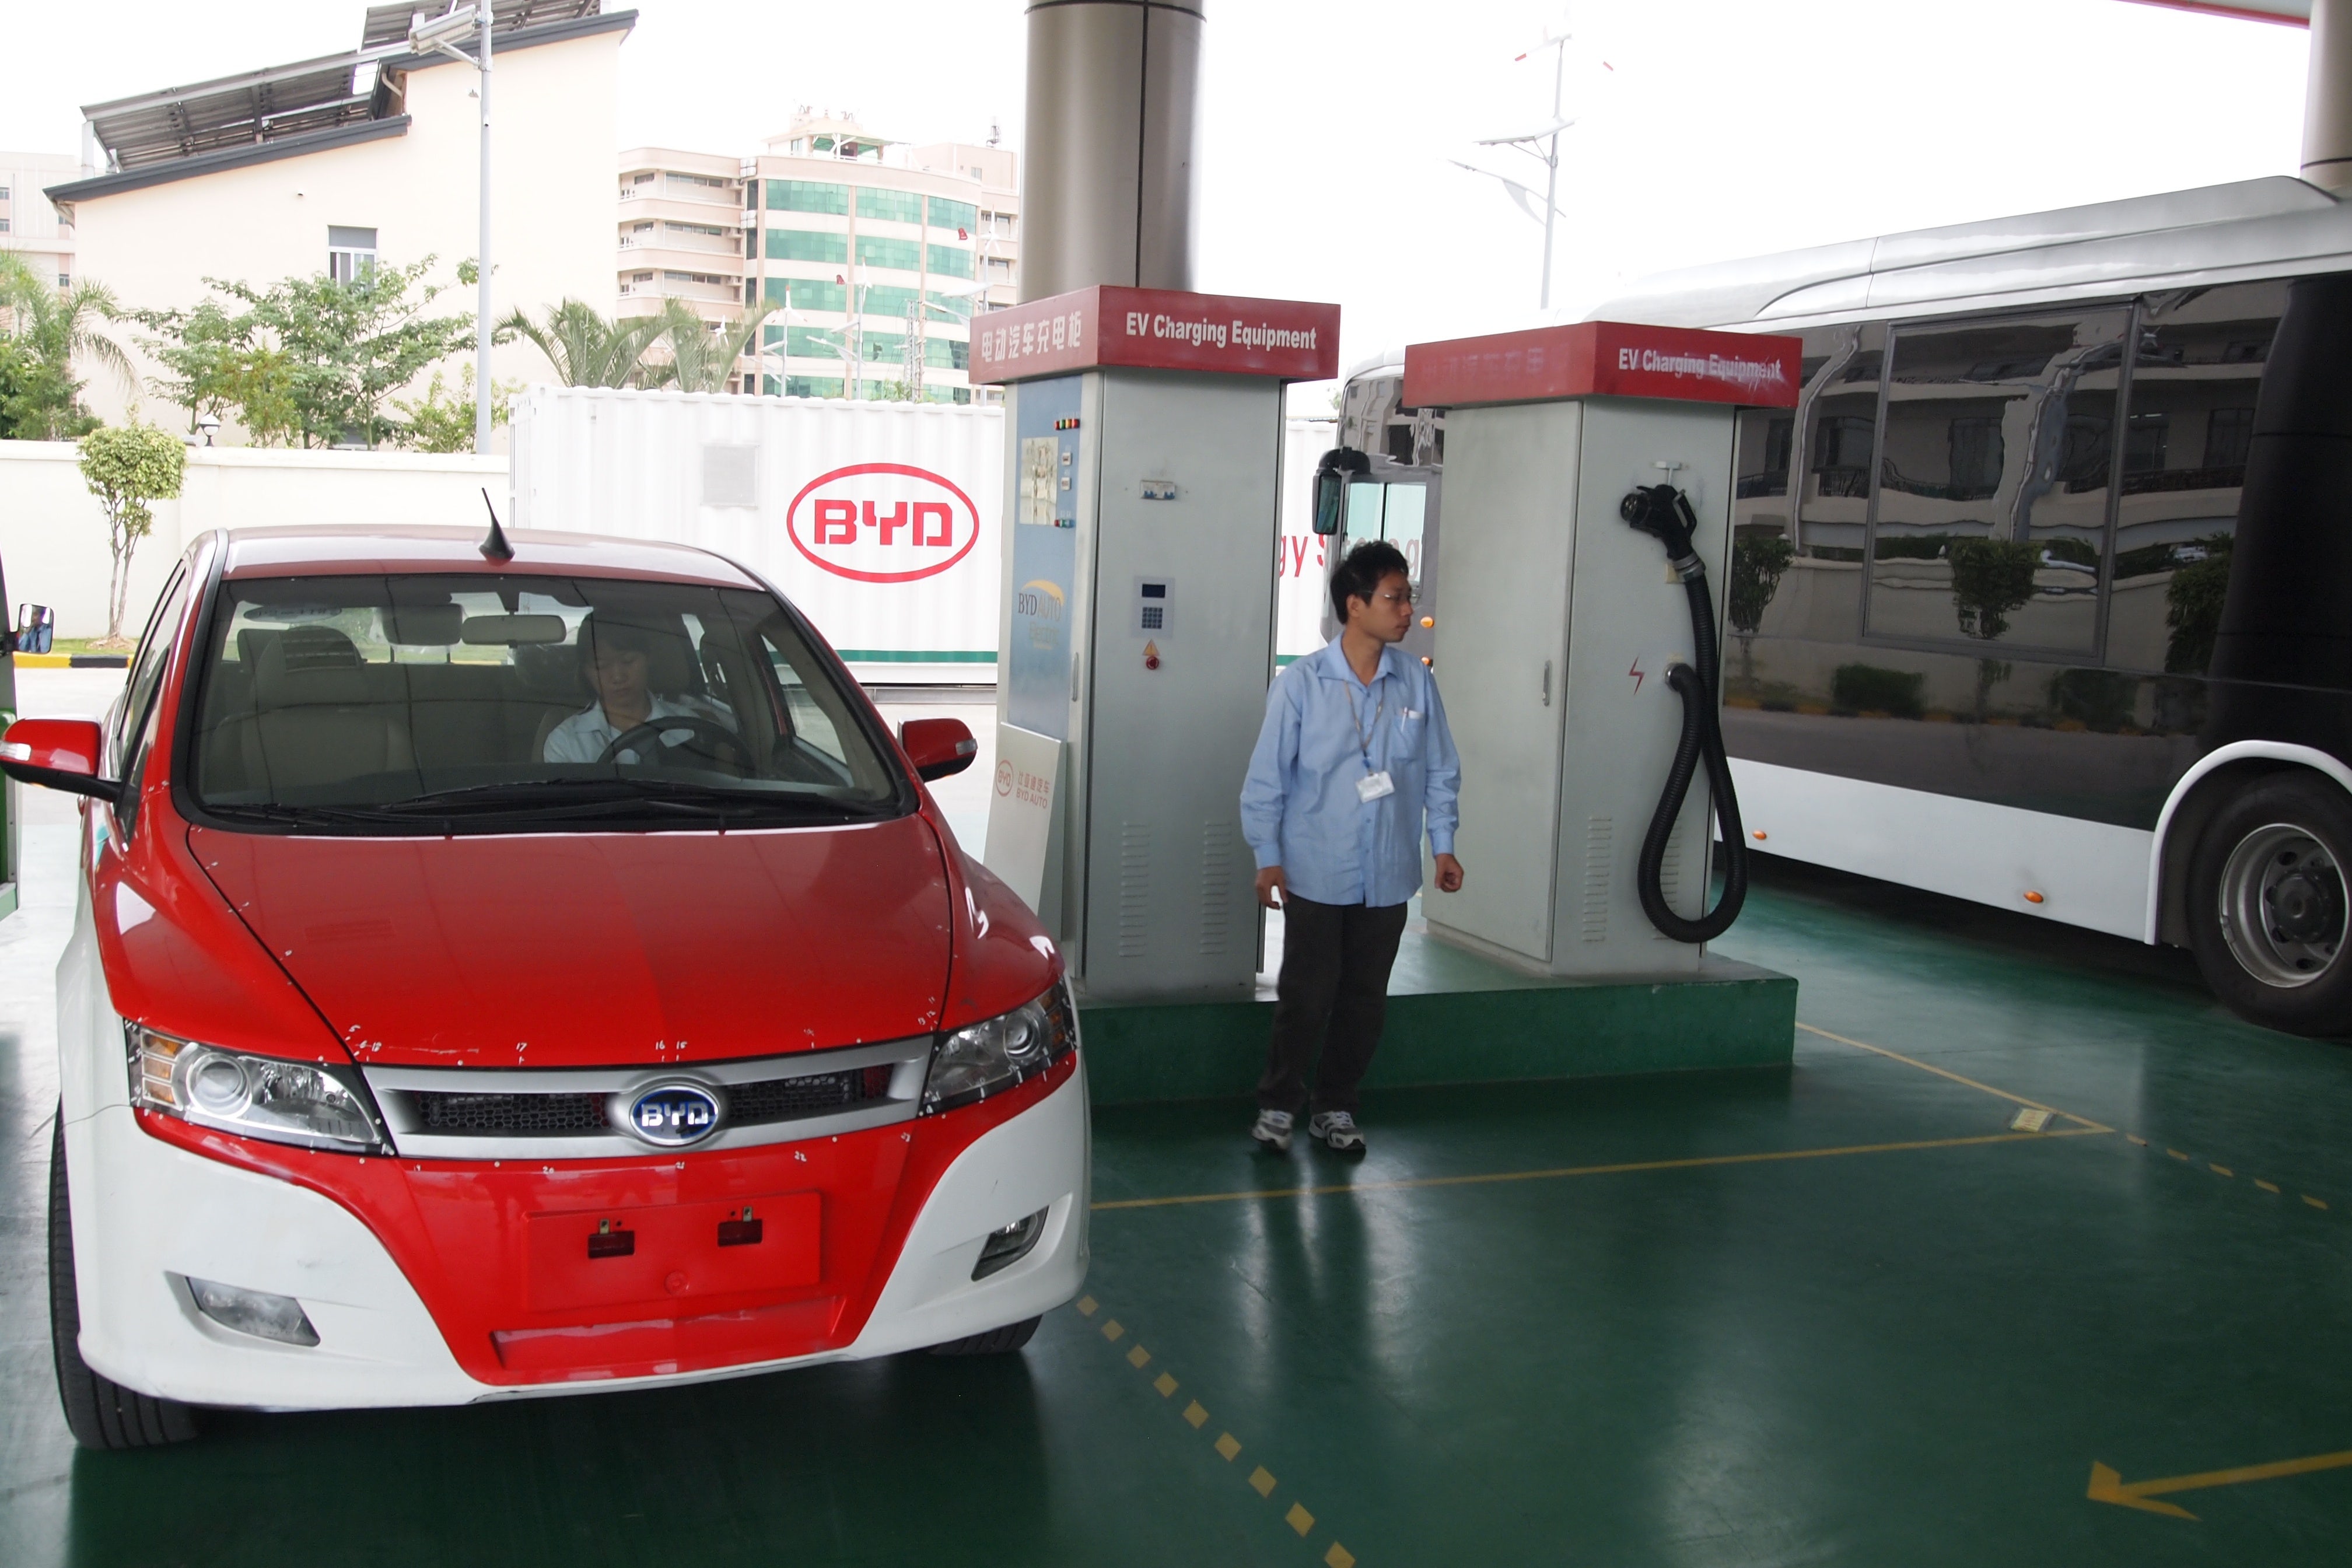 Warren Buffett-Backed BYD Outdoes Nio, Xpeng, Li Auto In April EV Deliveries